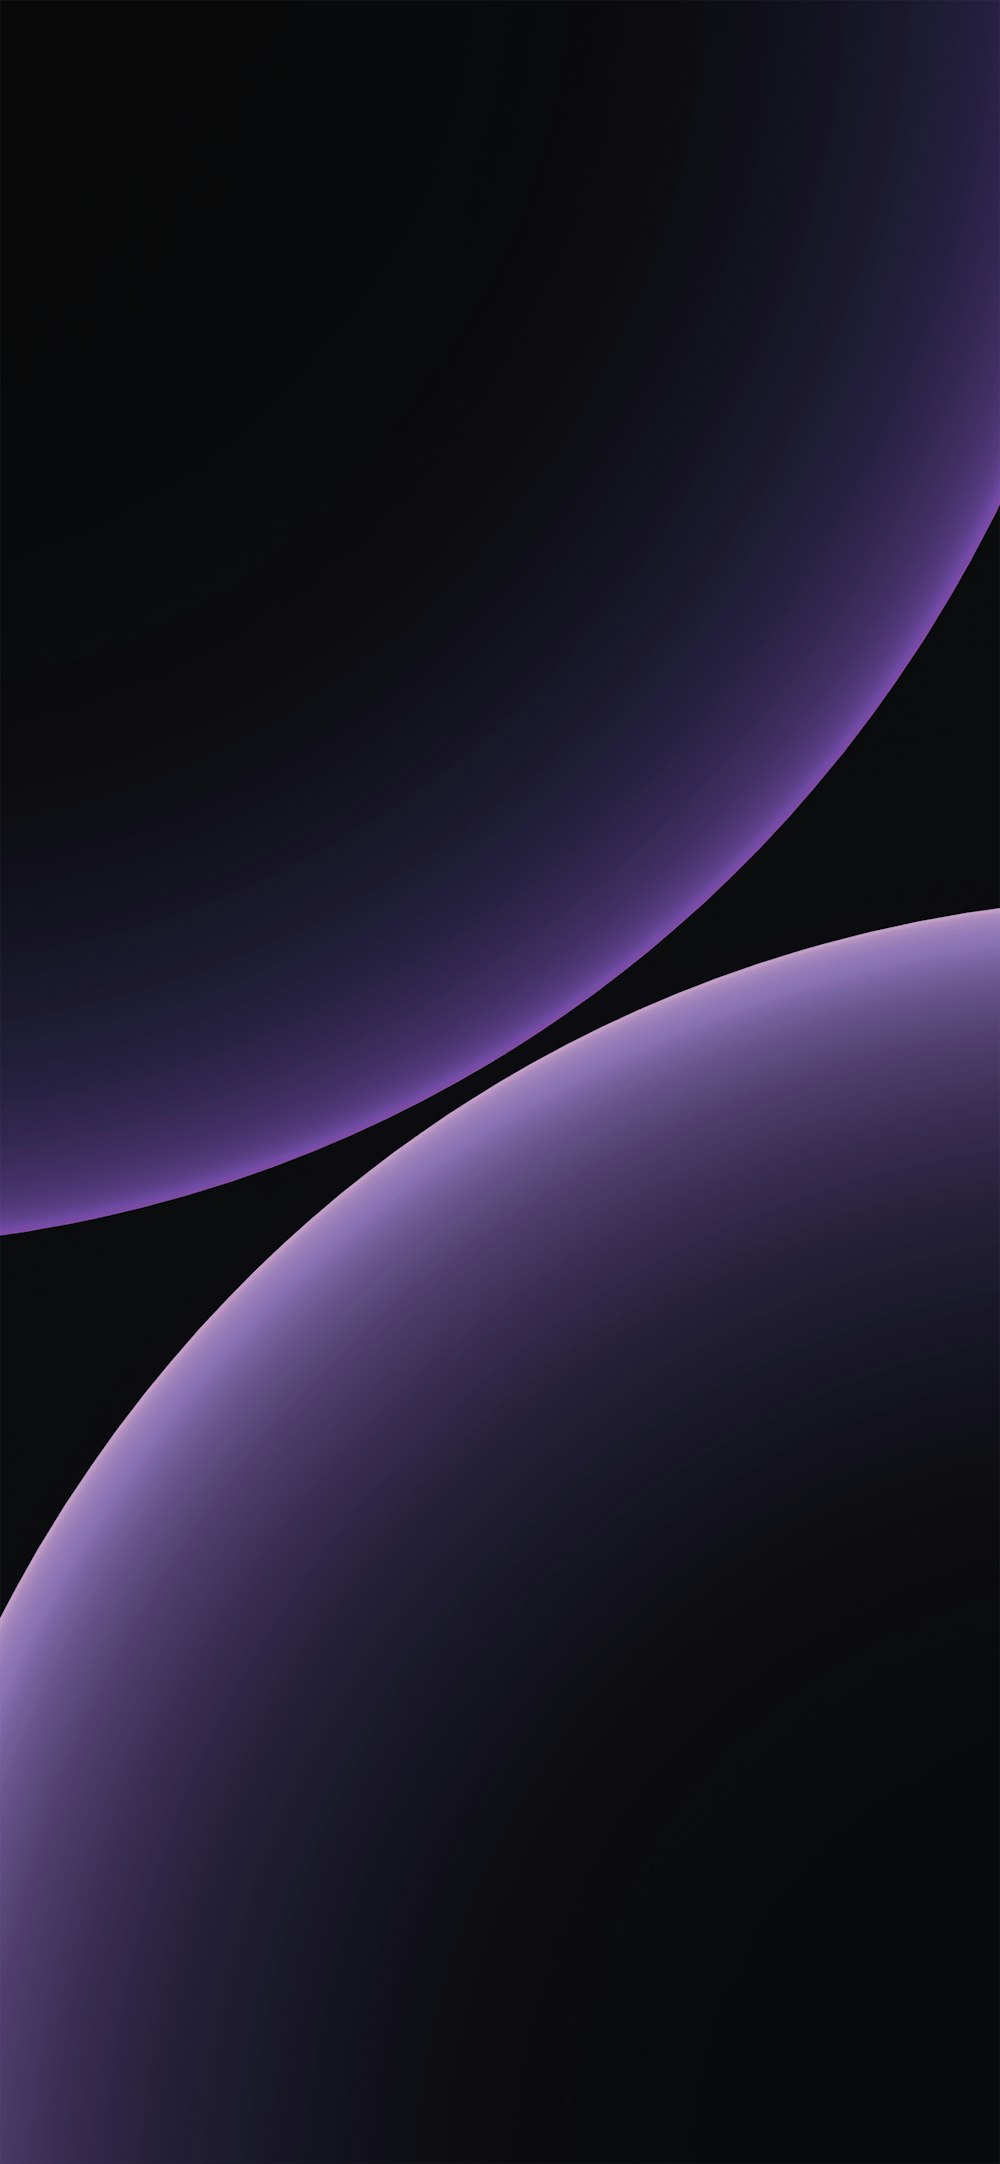 a black and purple iphone wallpaper with a black background